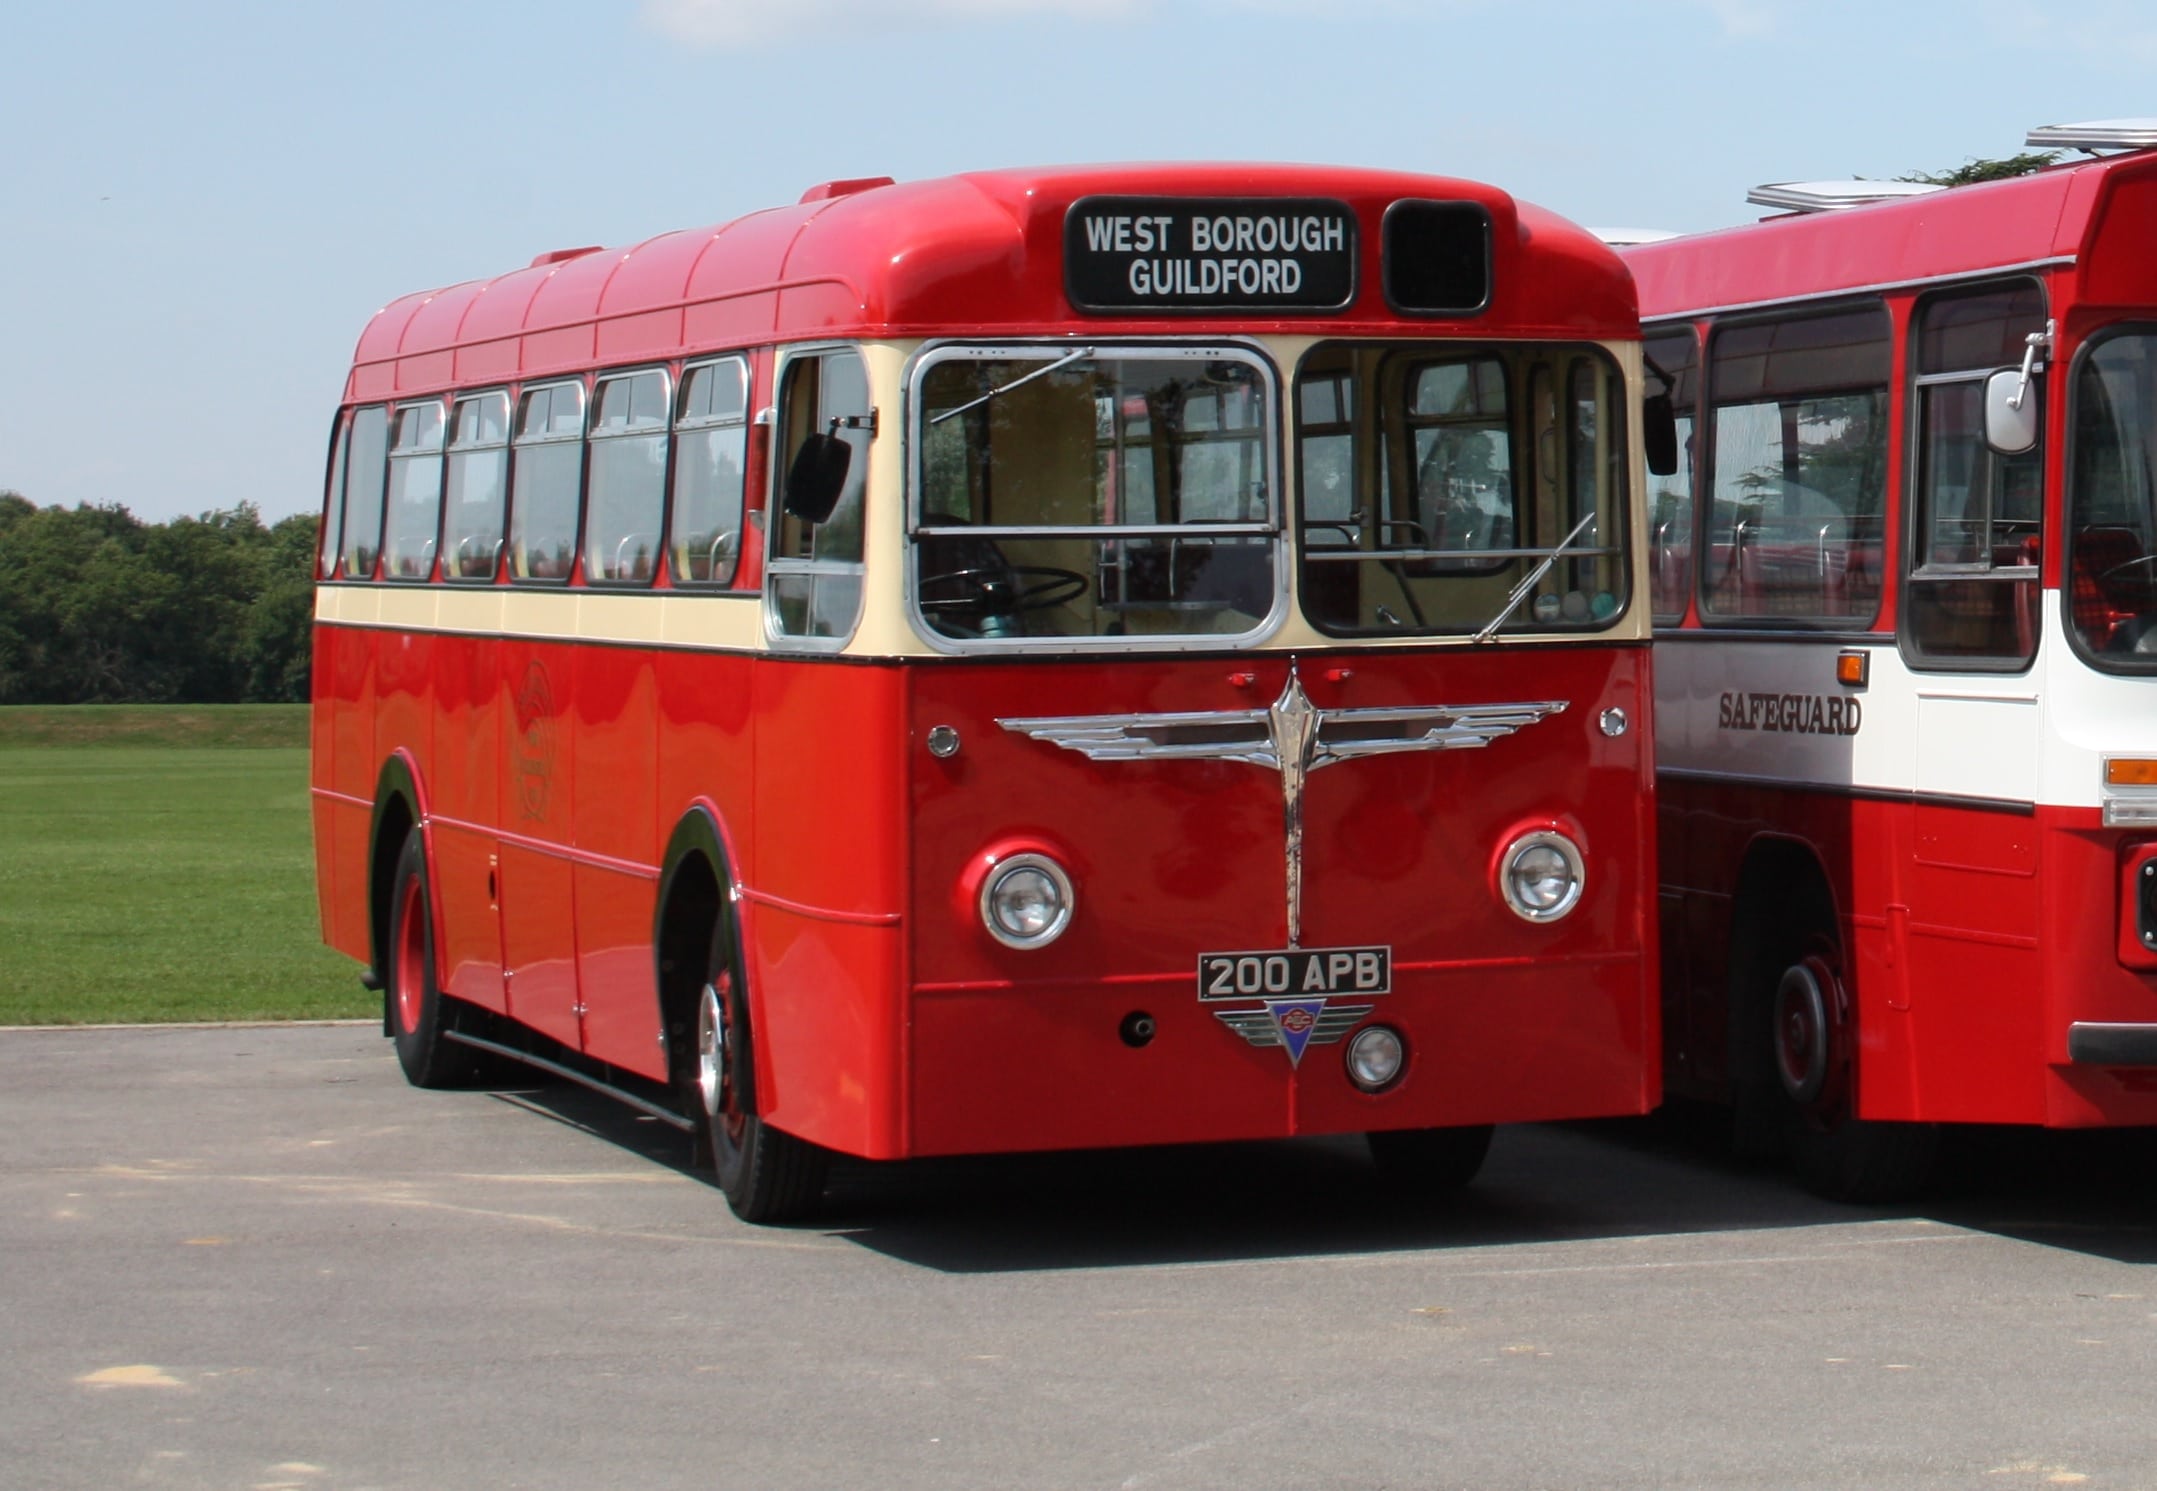 Safeguard Coaches AEC Reliance with Burlingham body